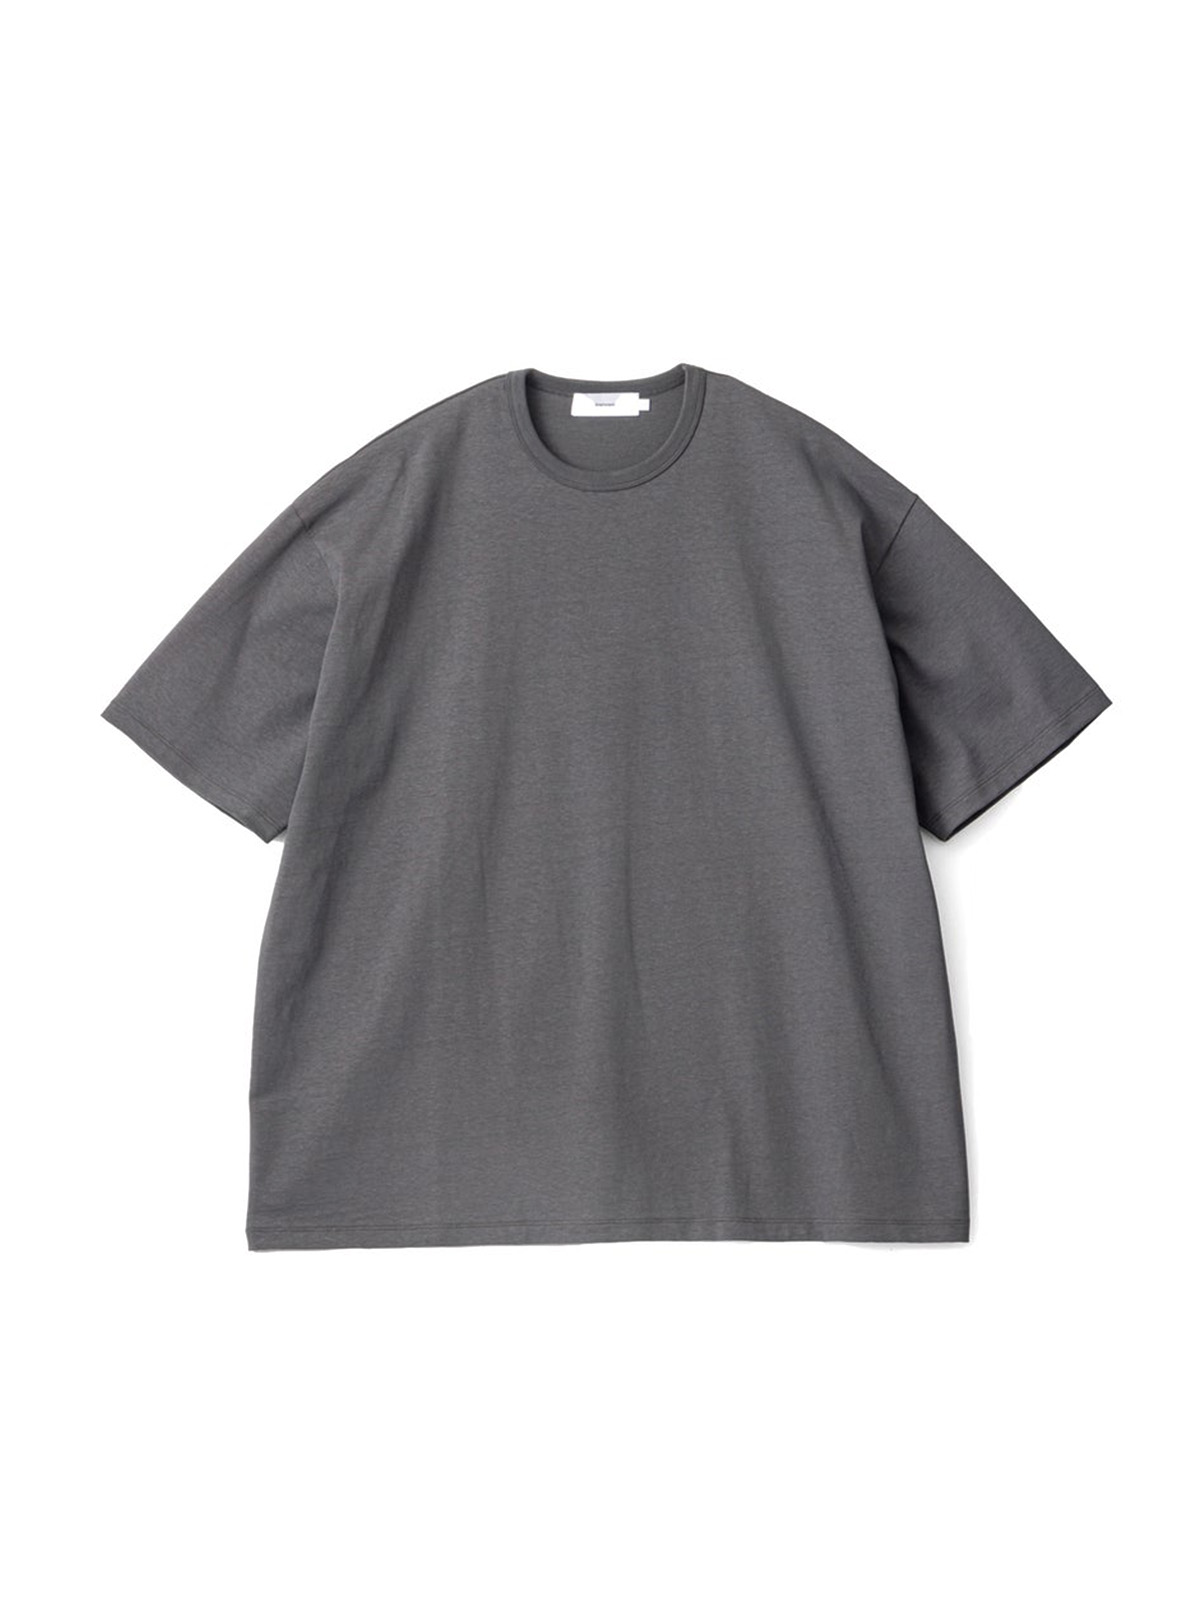 RECYCLED COTTON JERSEY S/S TEE (GRAY)